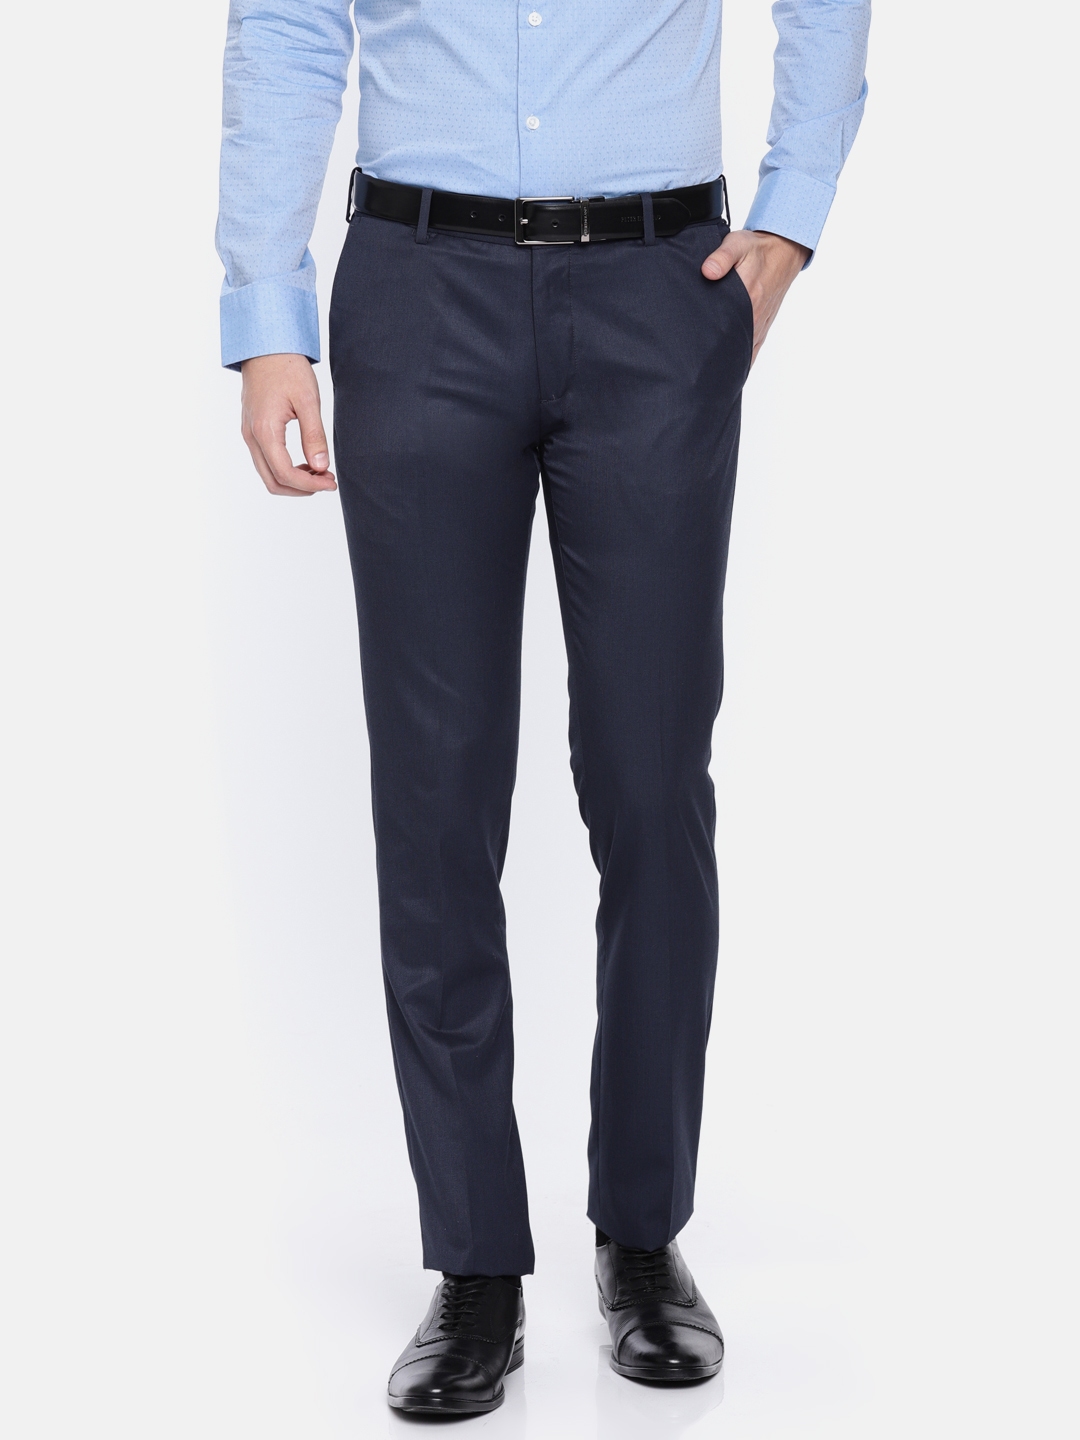 Buy U.S. Polo Assn. Men Navy Blue Regular Fit Solid Formal Trousers ...